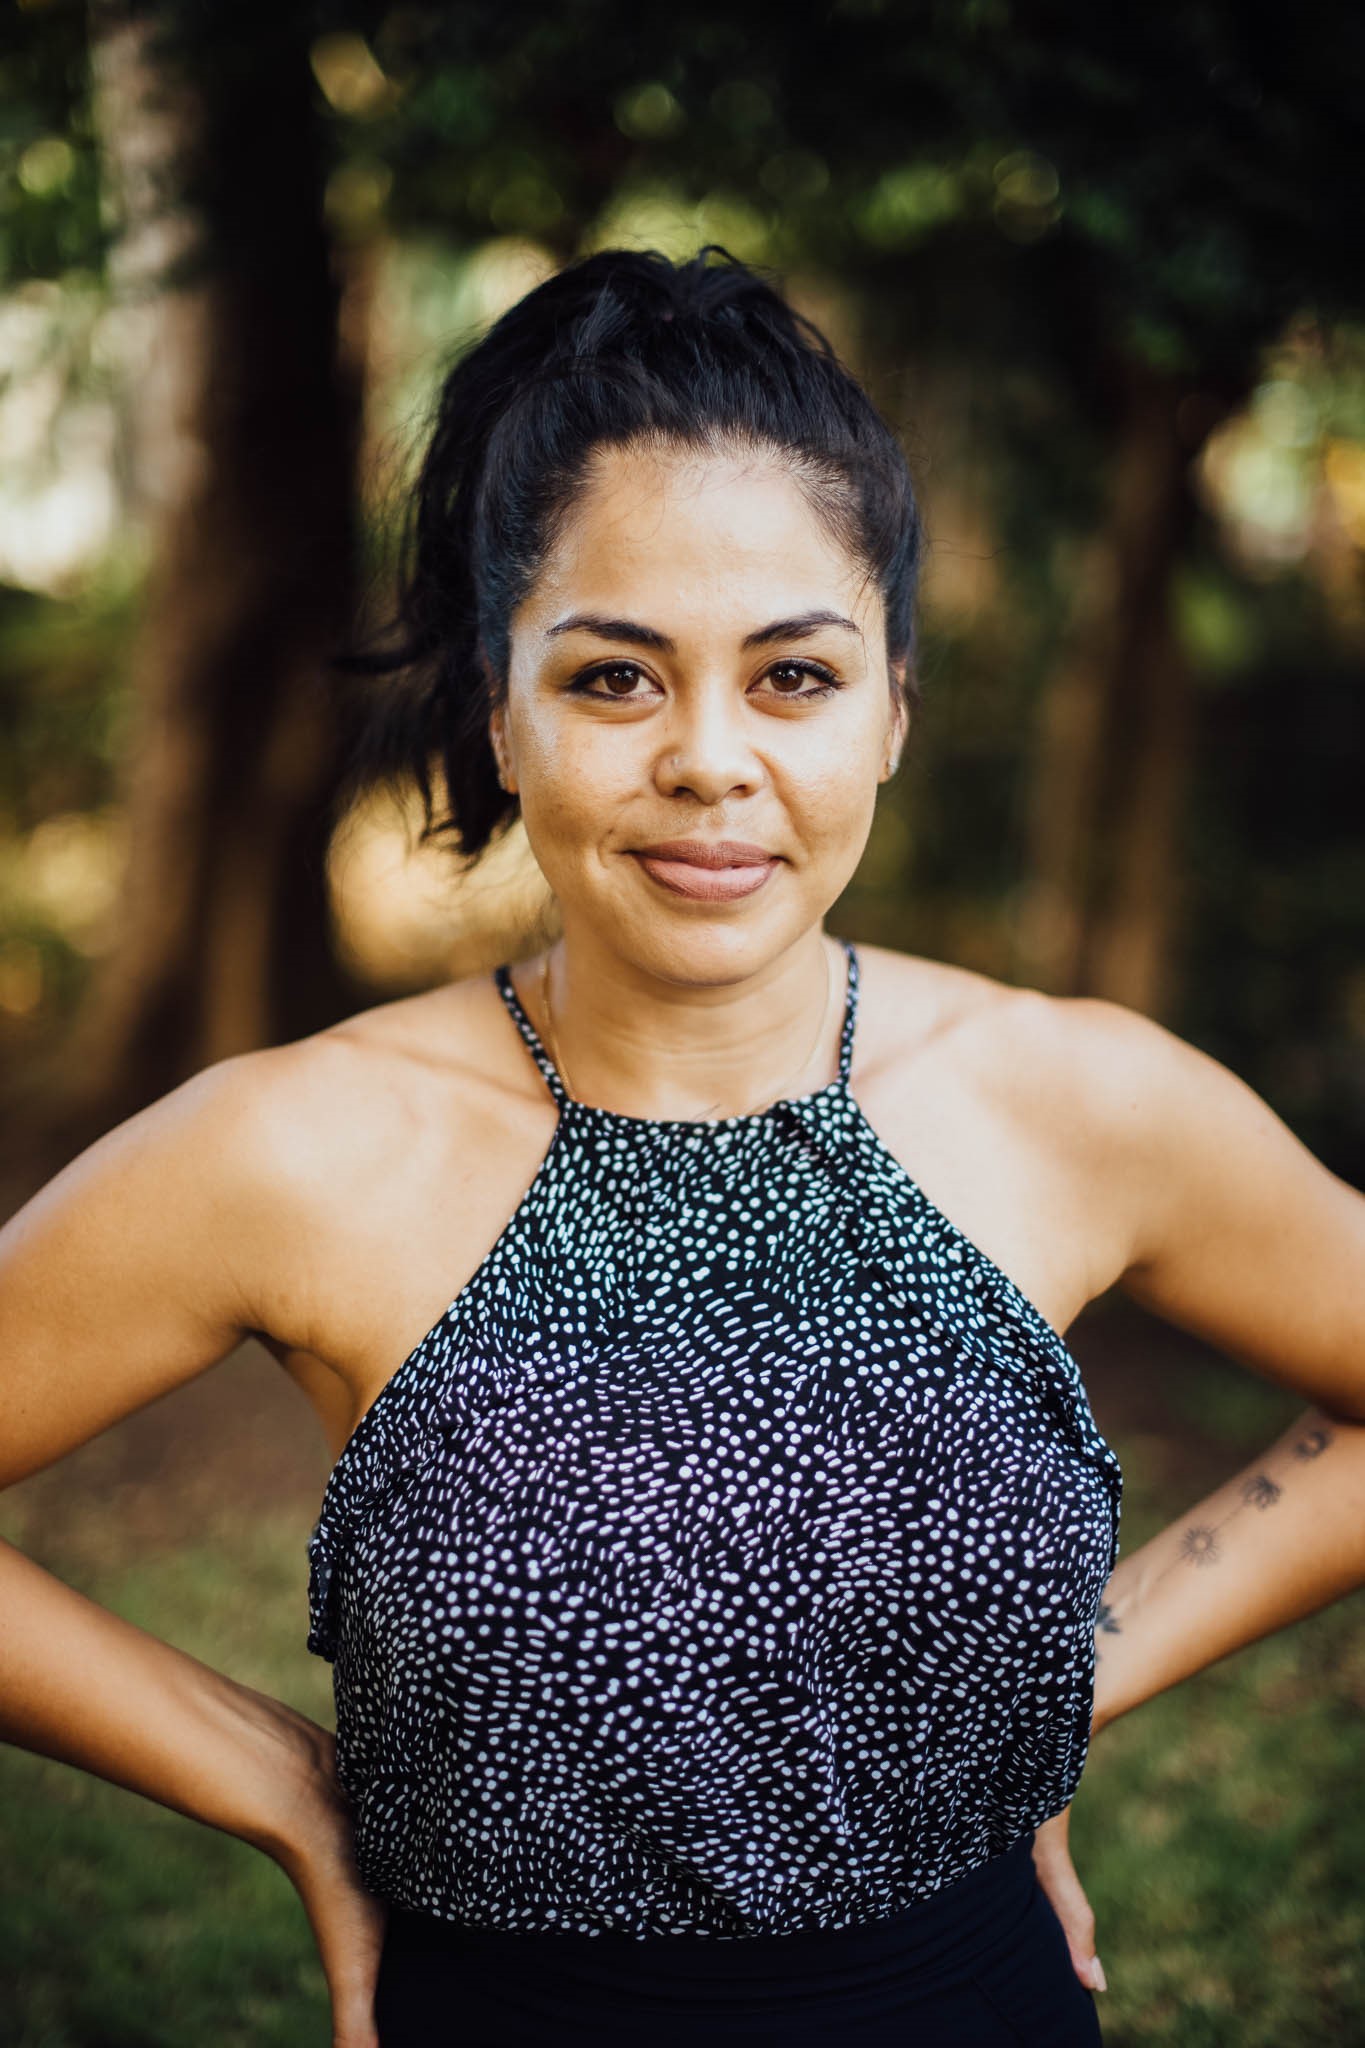 Chanelle Bjornum Motuliki is passionate about health and natural products. In 2020, she created her own cosmetics brand, Tehya Skye Vanuatu, using locally sourced ingredients to create vegan, chemical-free products. 